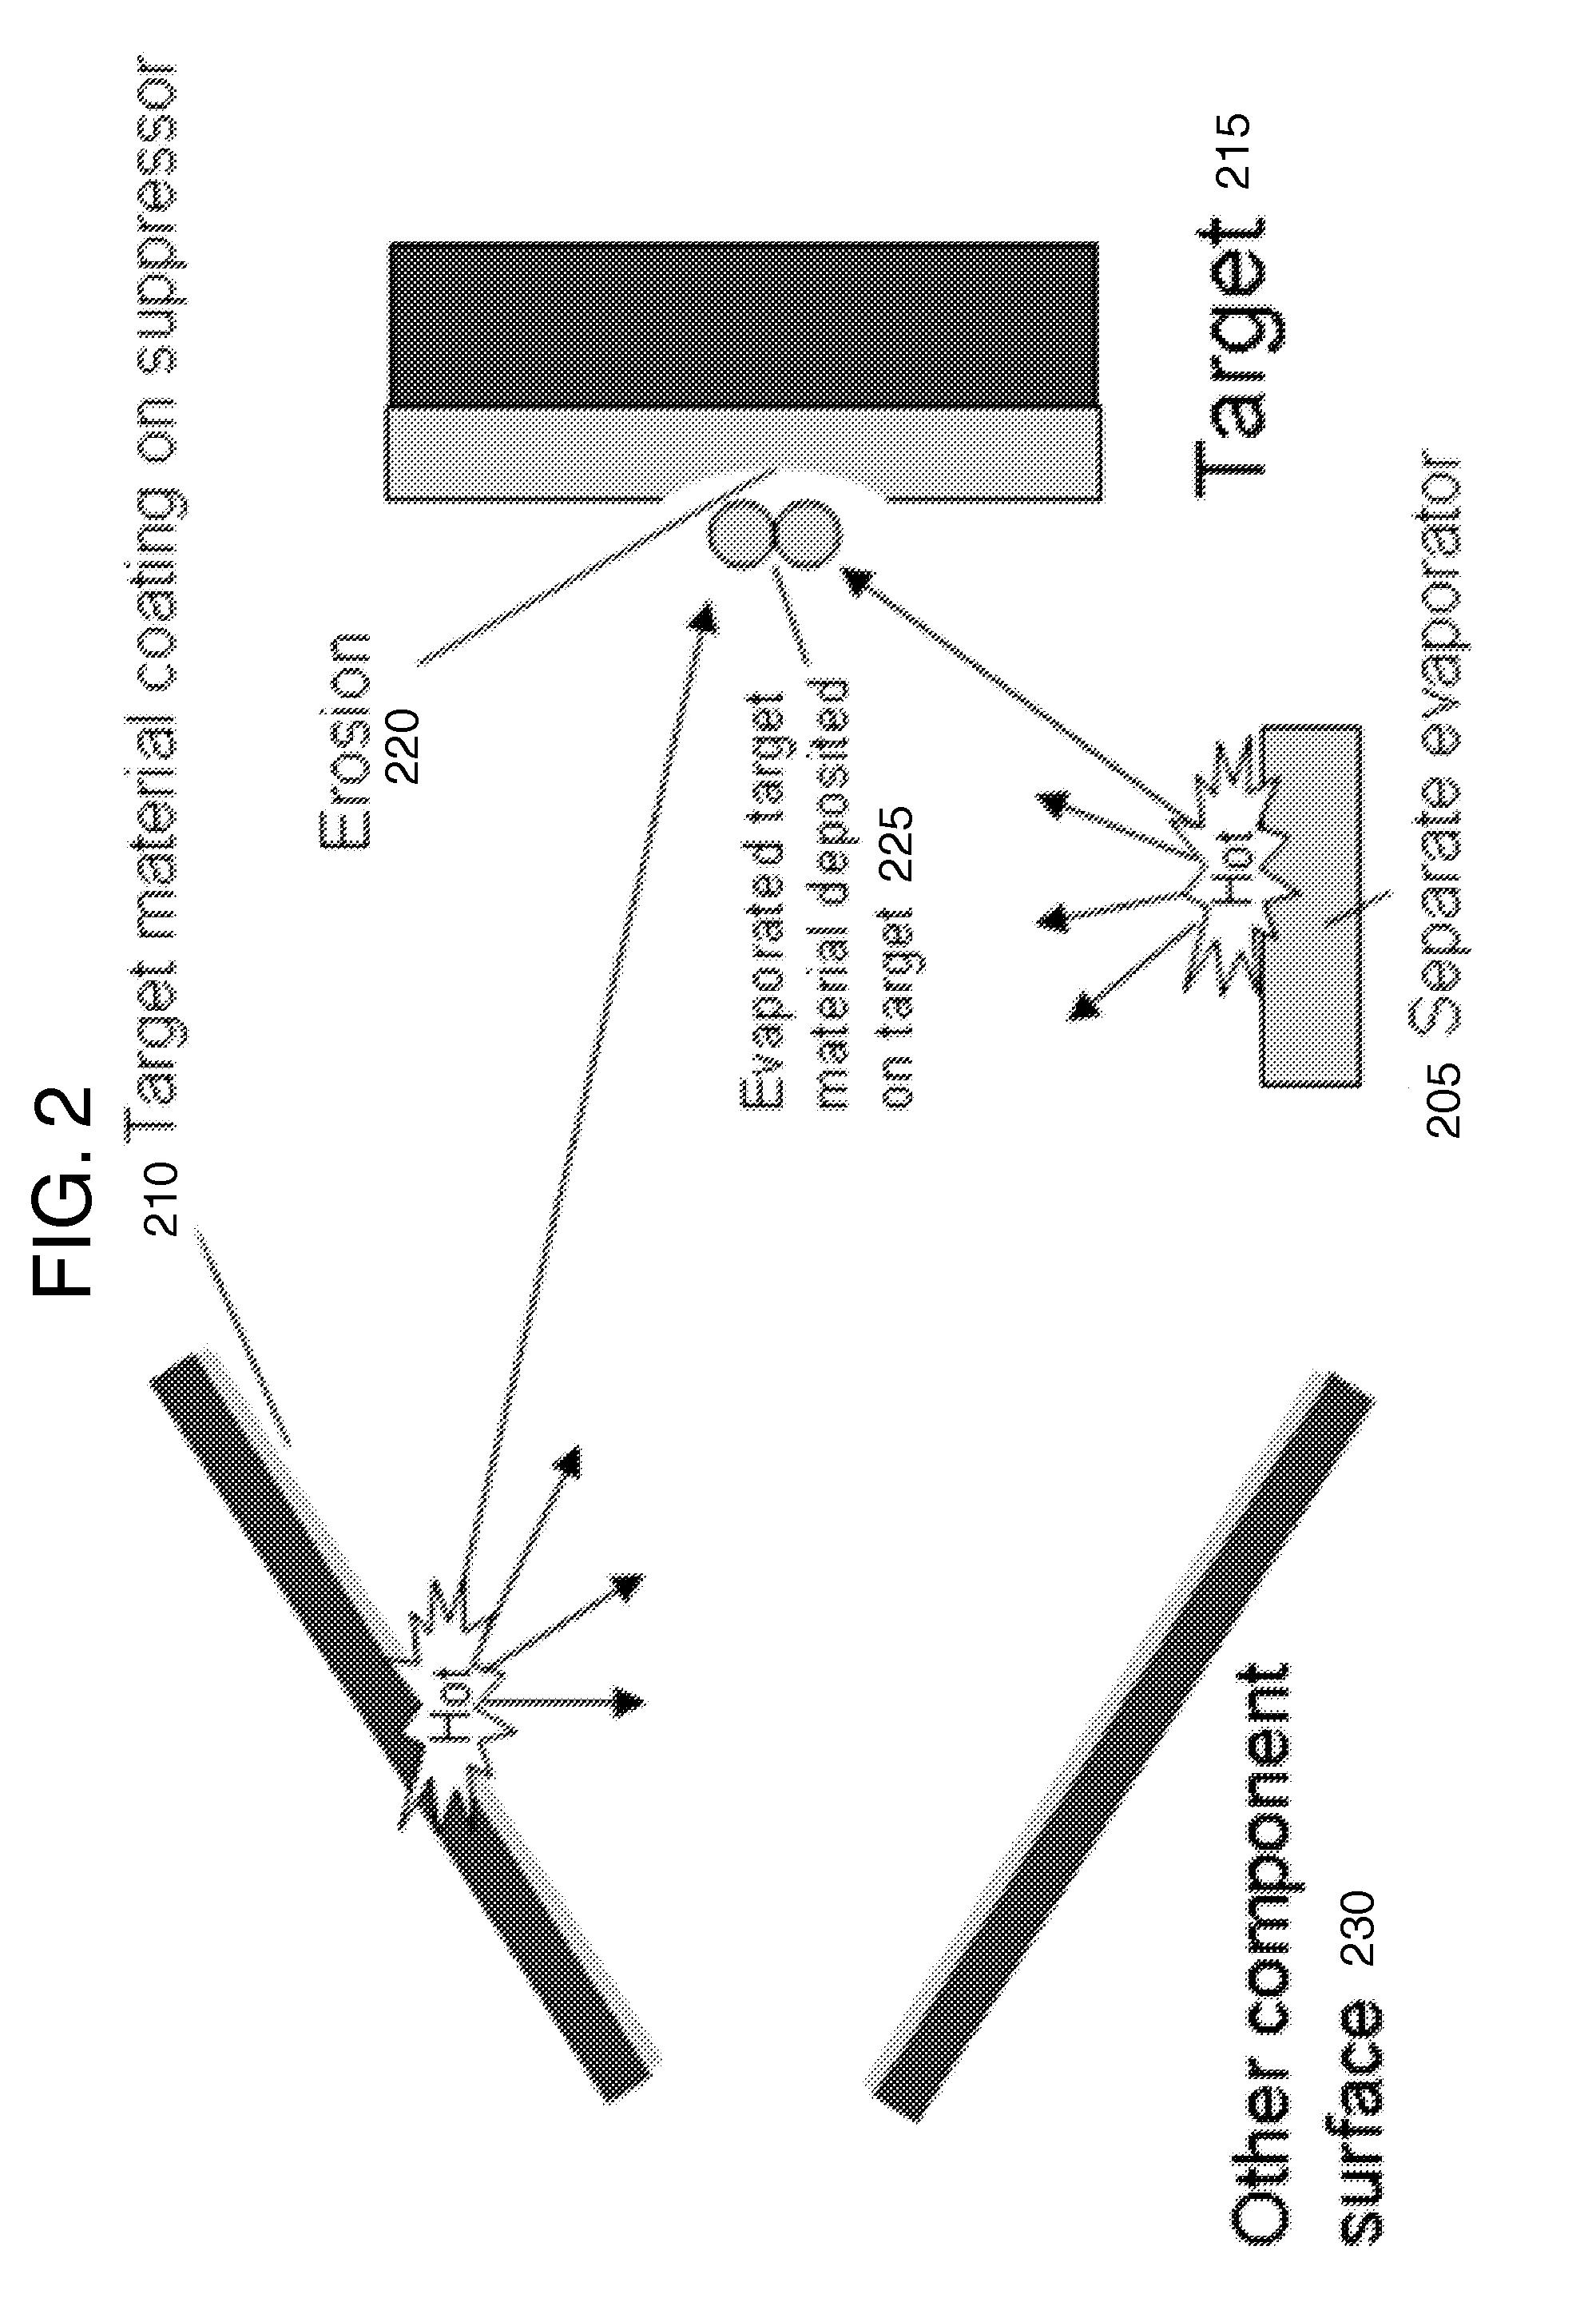 Method and system for in situ depositon and regeneration of high efficiency target materials for long life nuclear reaction devices